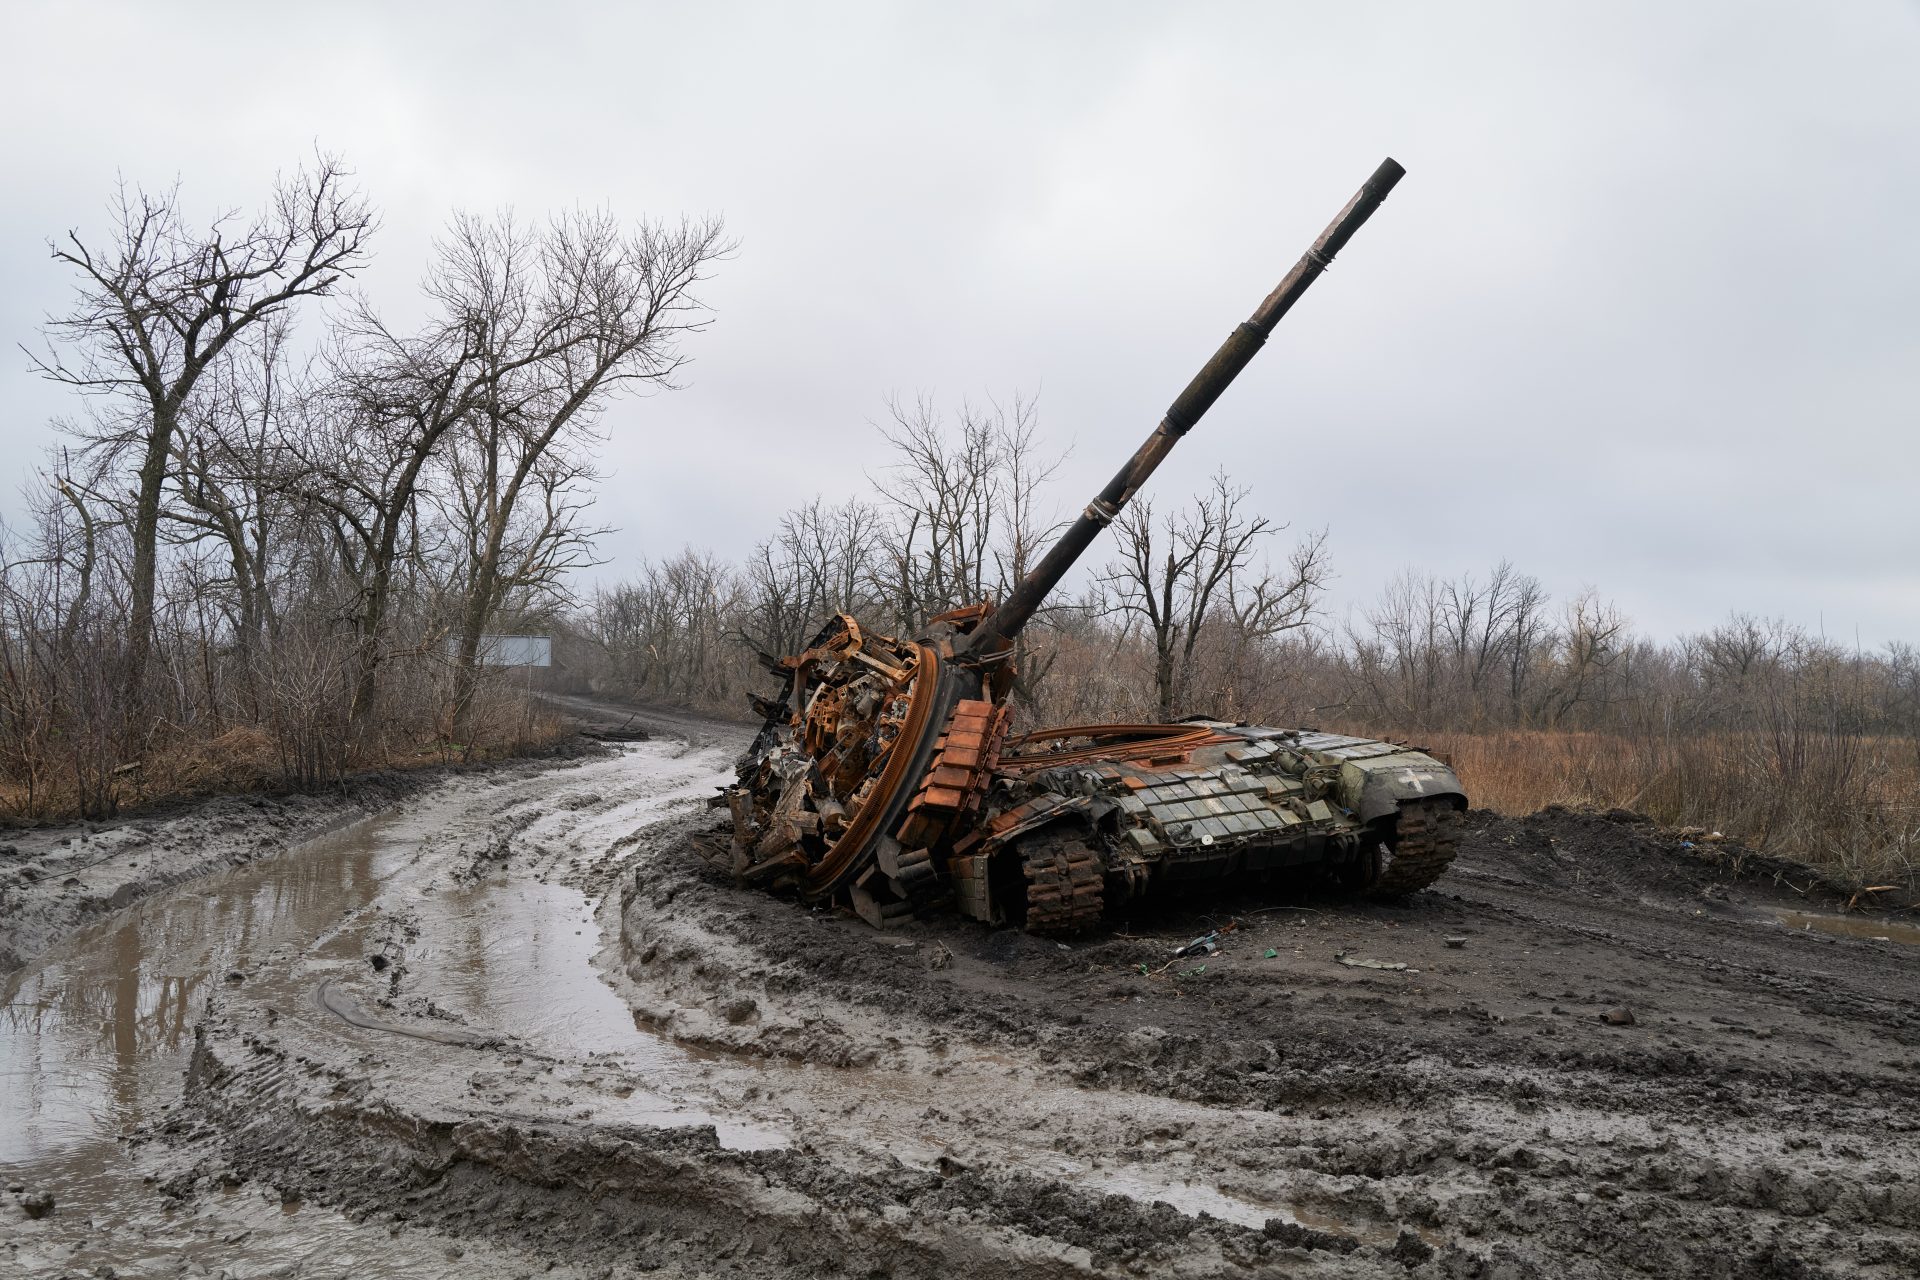 Ukraine could eventually be outmatched by Russia